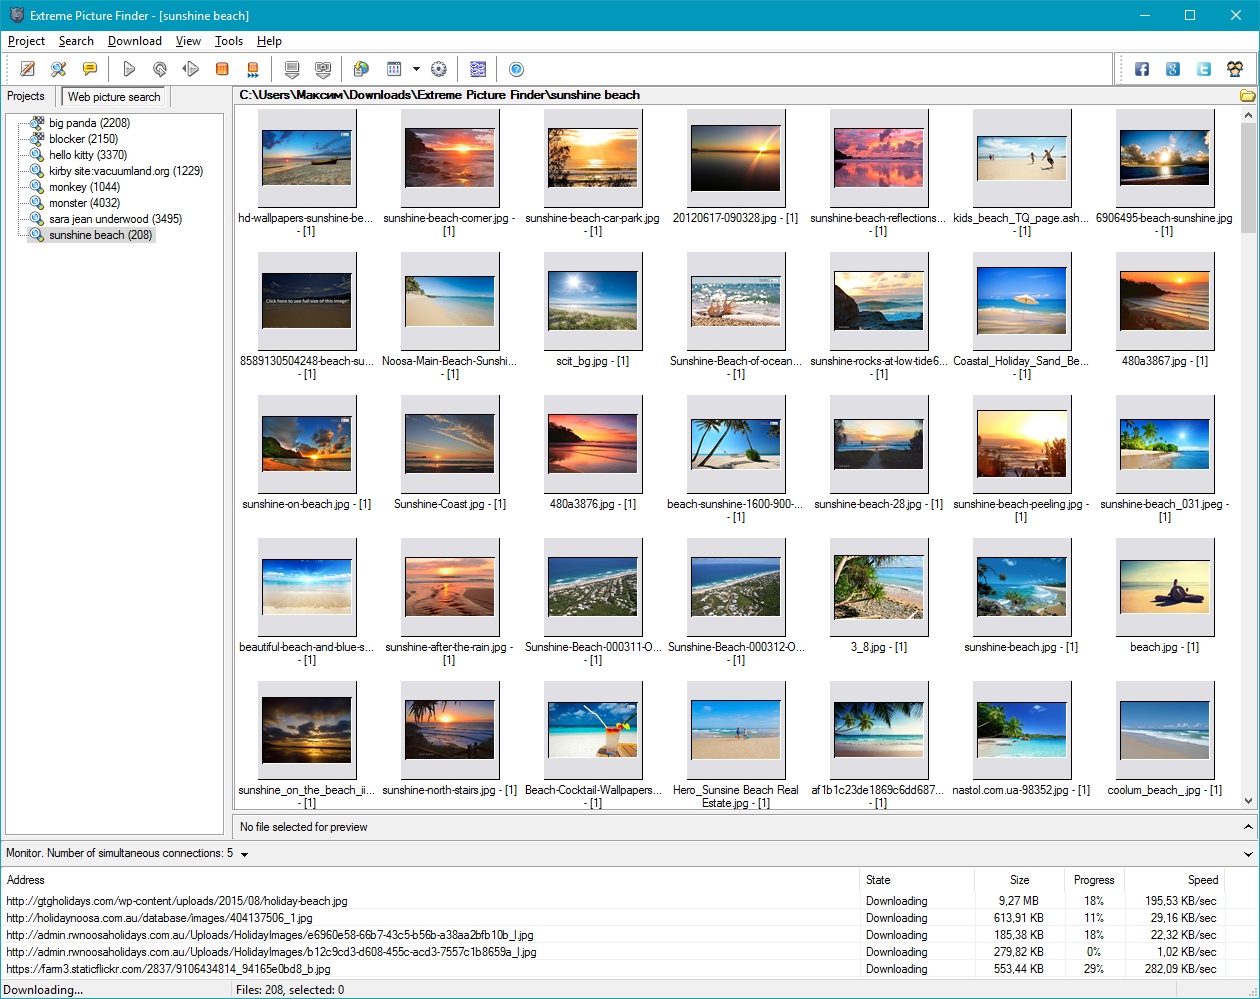 How To Download All Photos From Photobucket